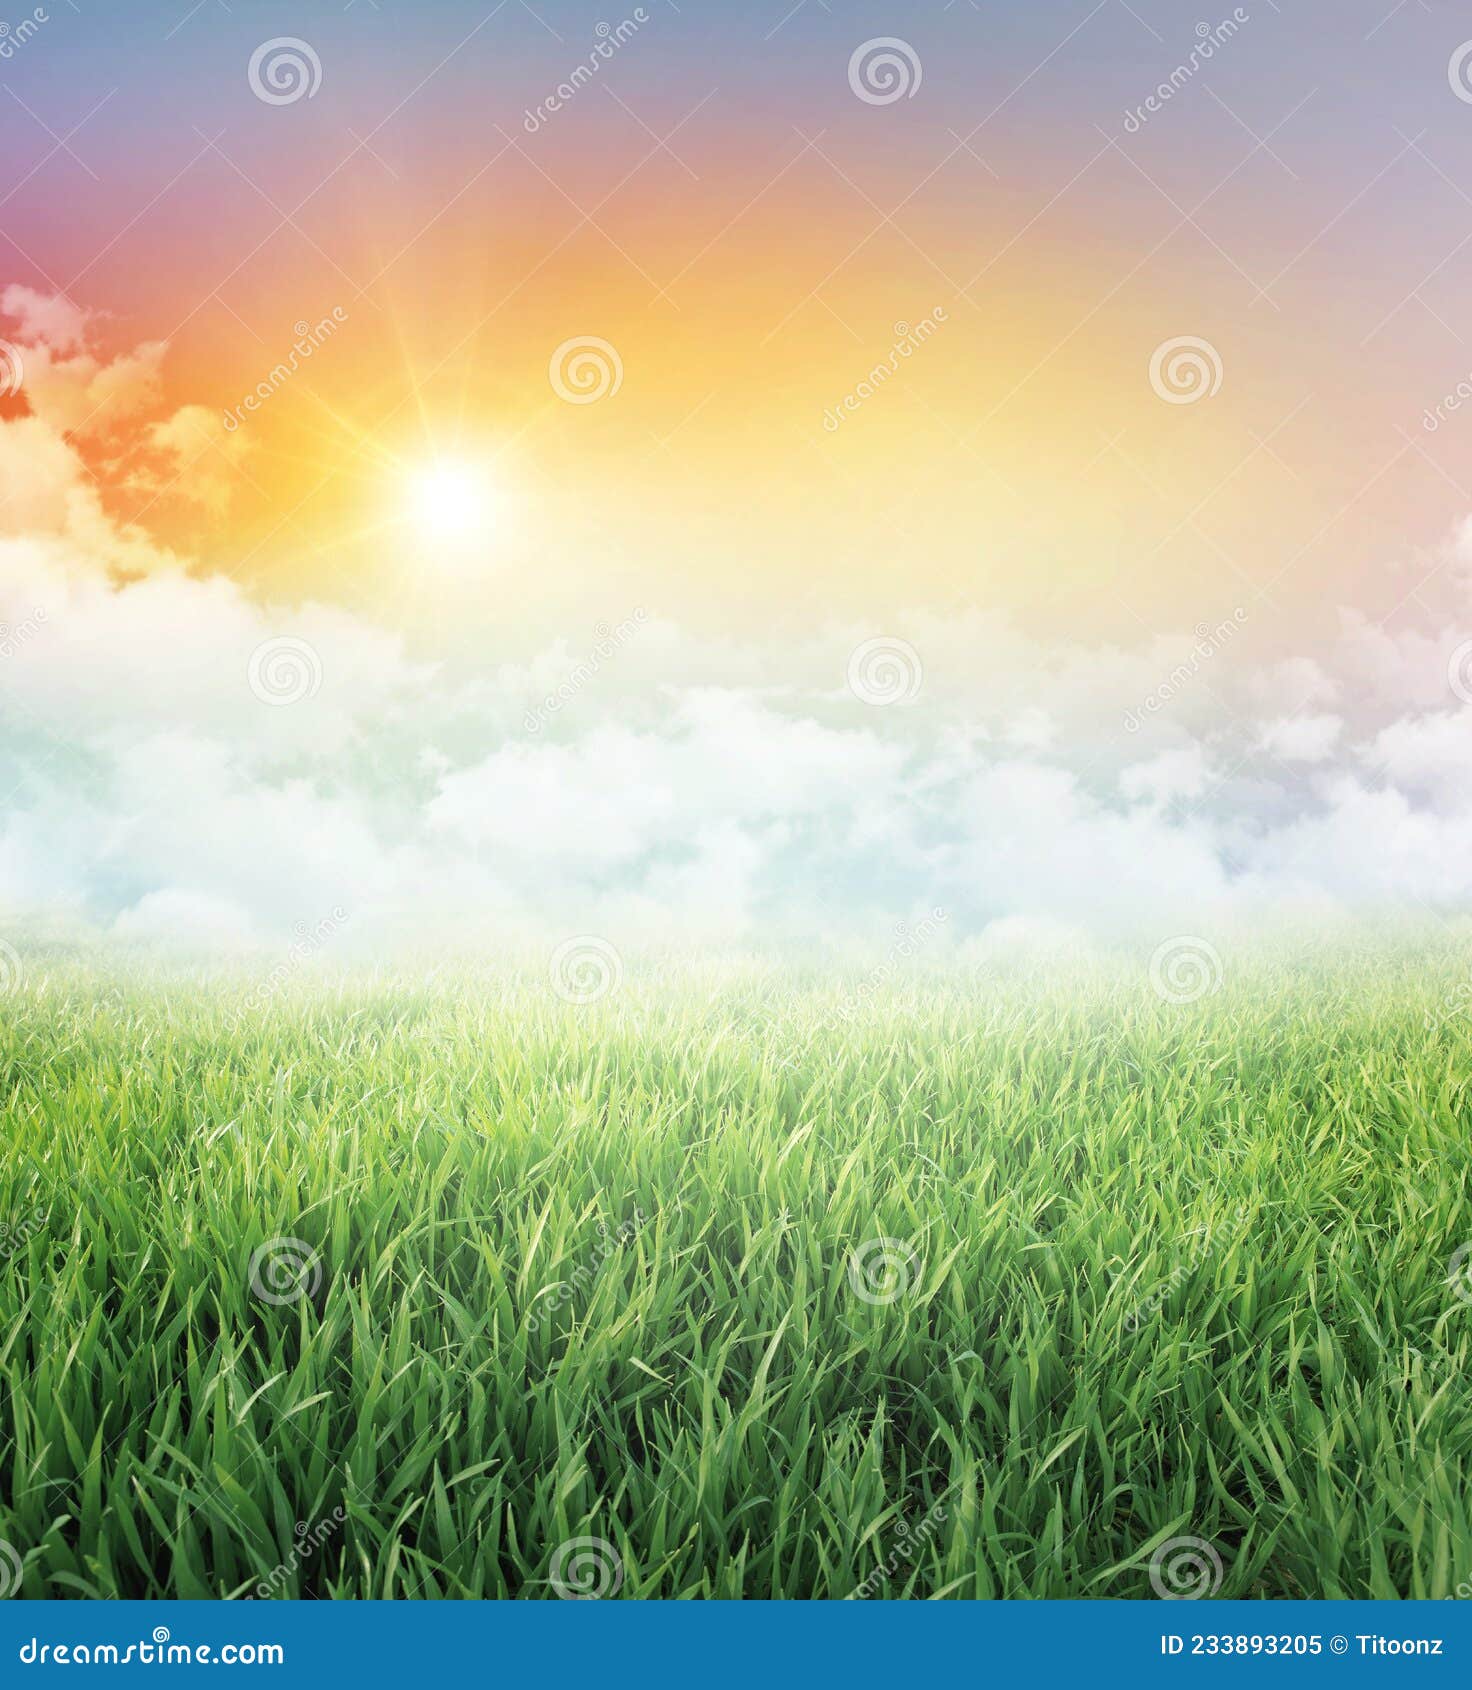 Green Field Under the Rising Sun Stock Image - Image of dusk, growing:  233893205